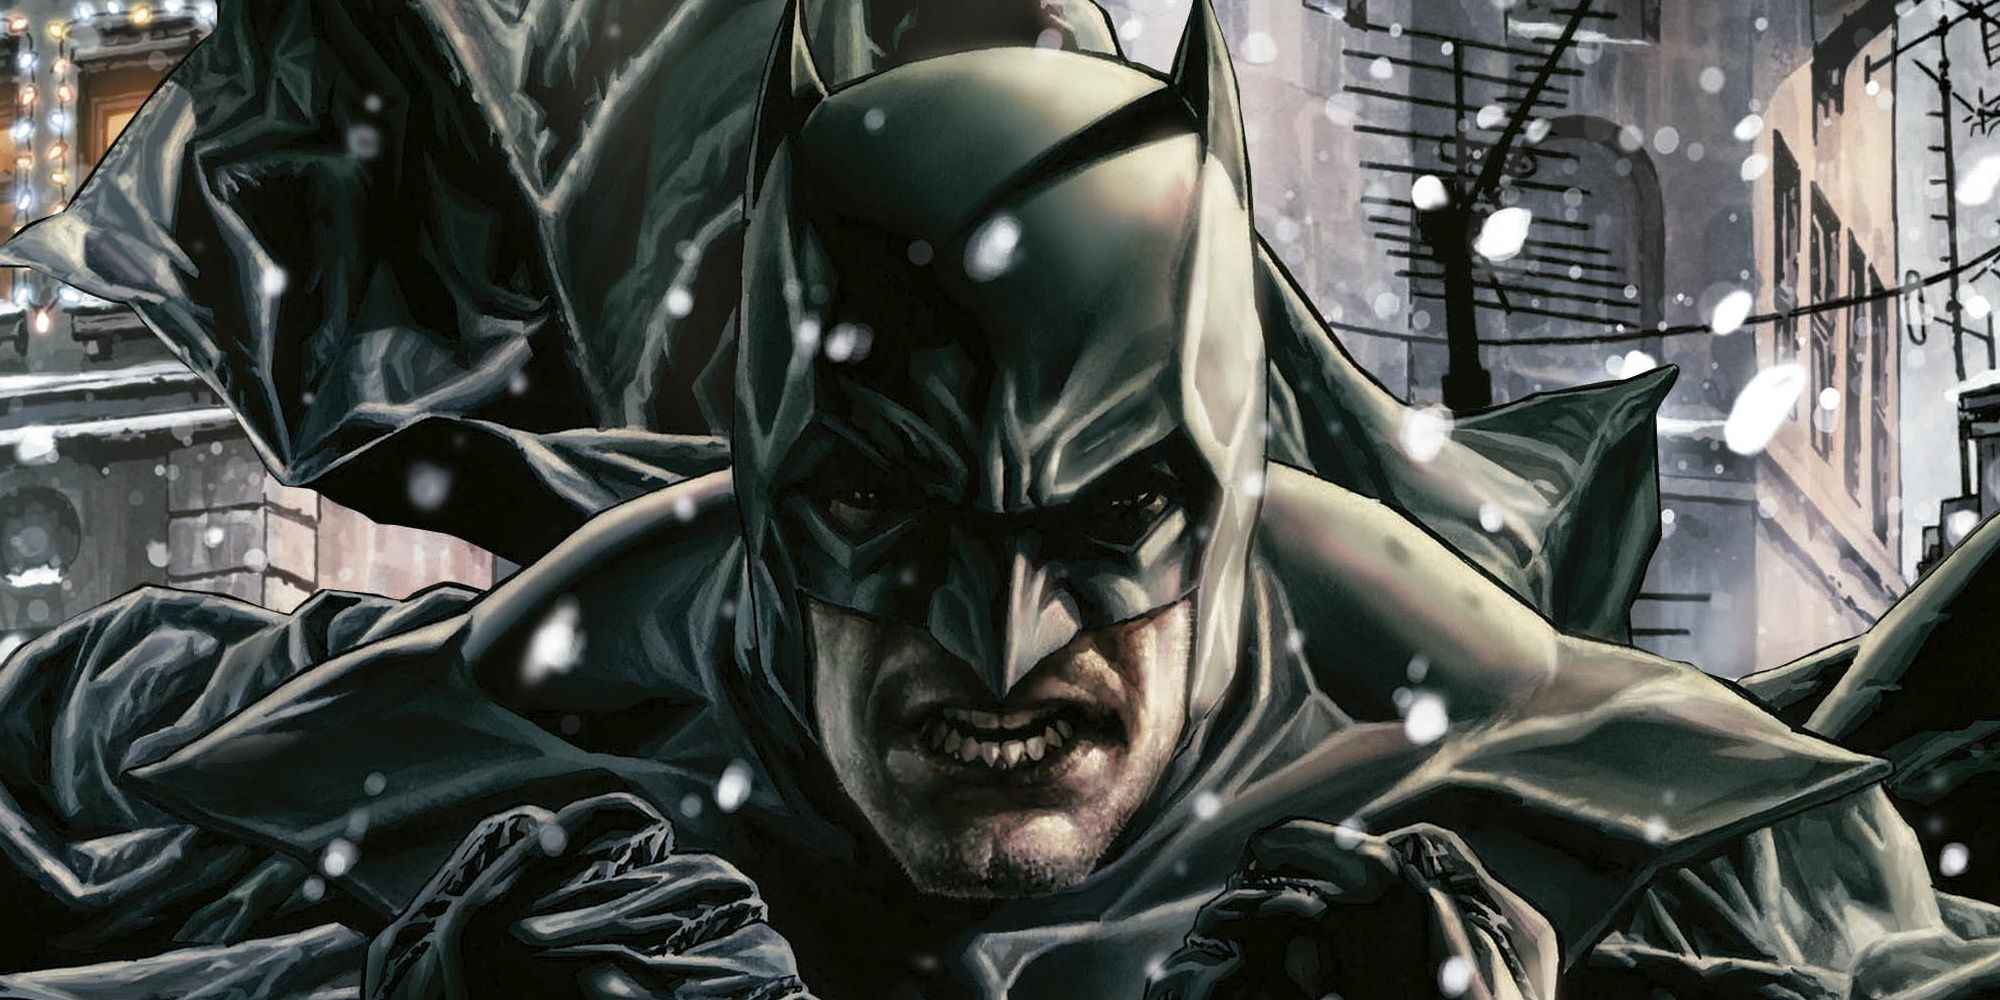 Batman walking on snow with his fists raised 